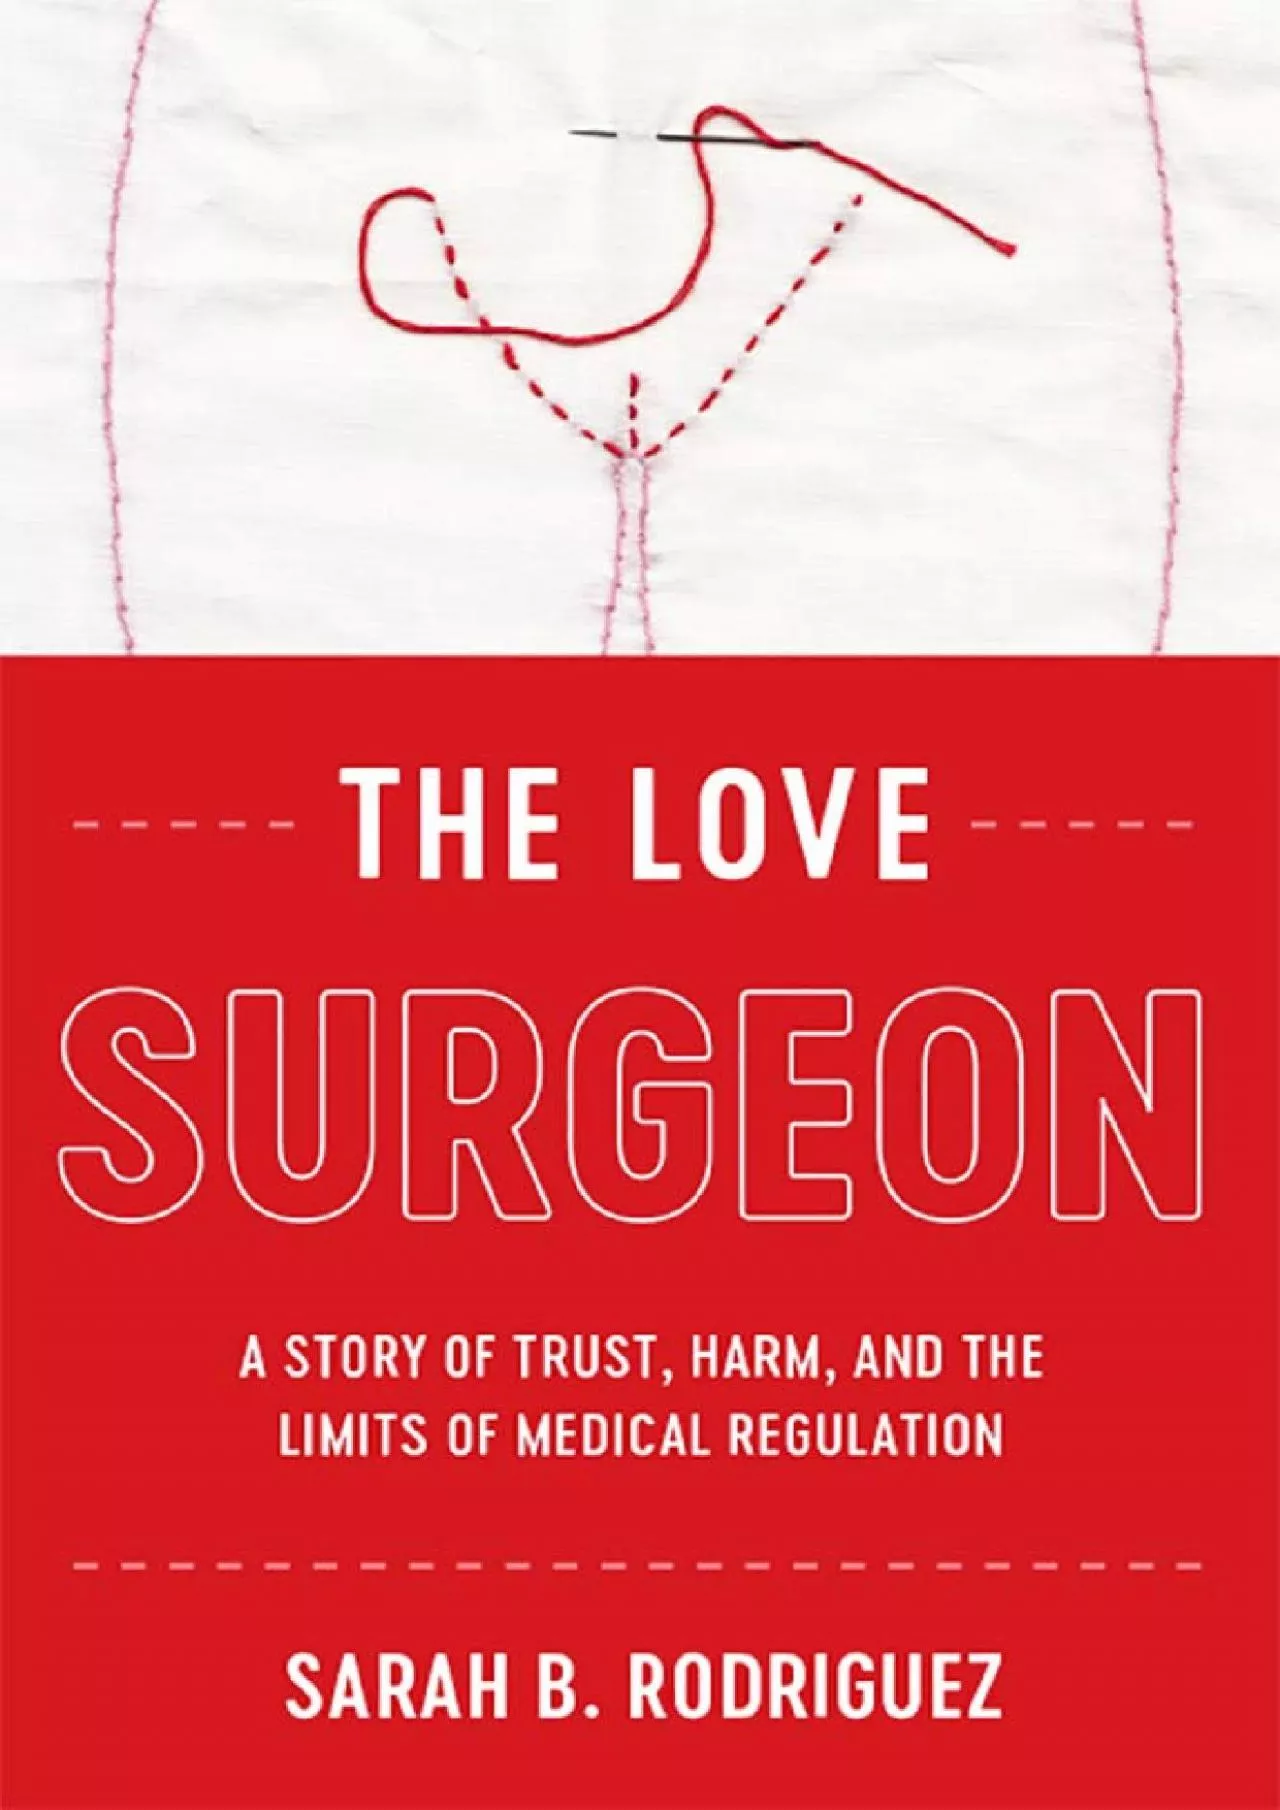 [BOOK]-The Love Surgeon: A Story of Trust, Harm, and the Limits of Medical Regulation